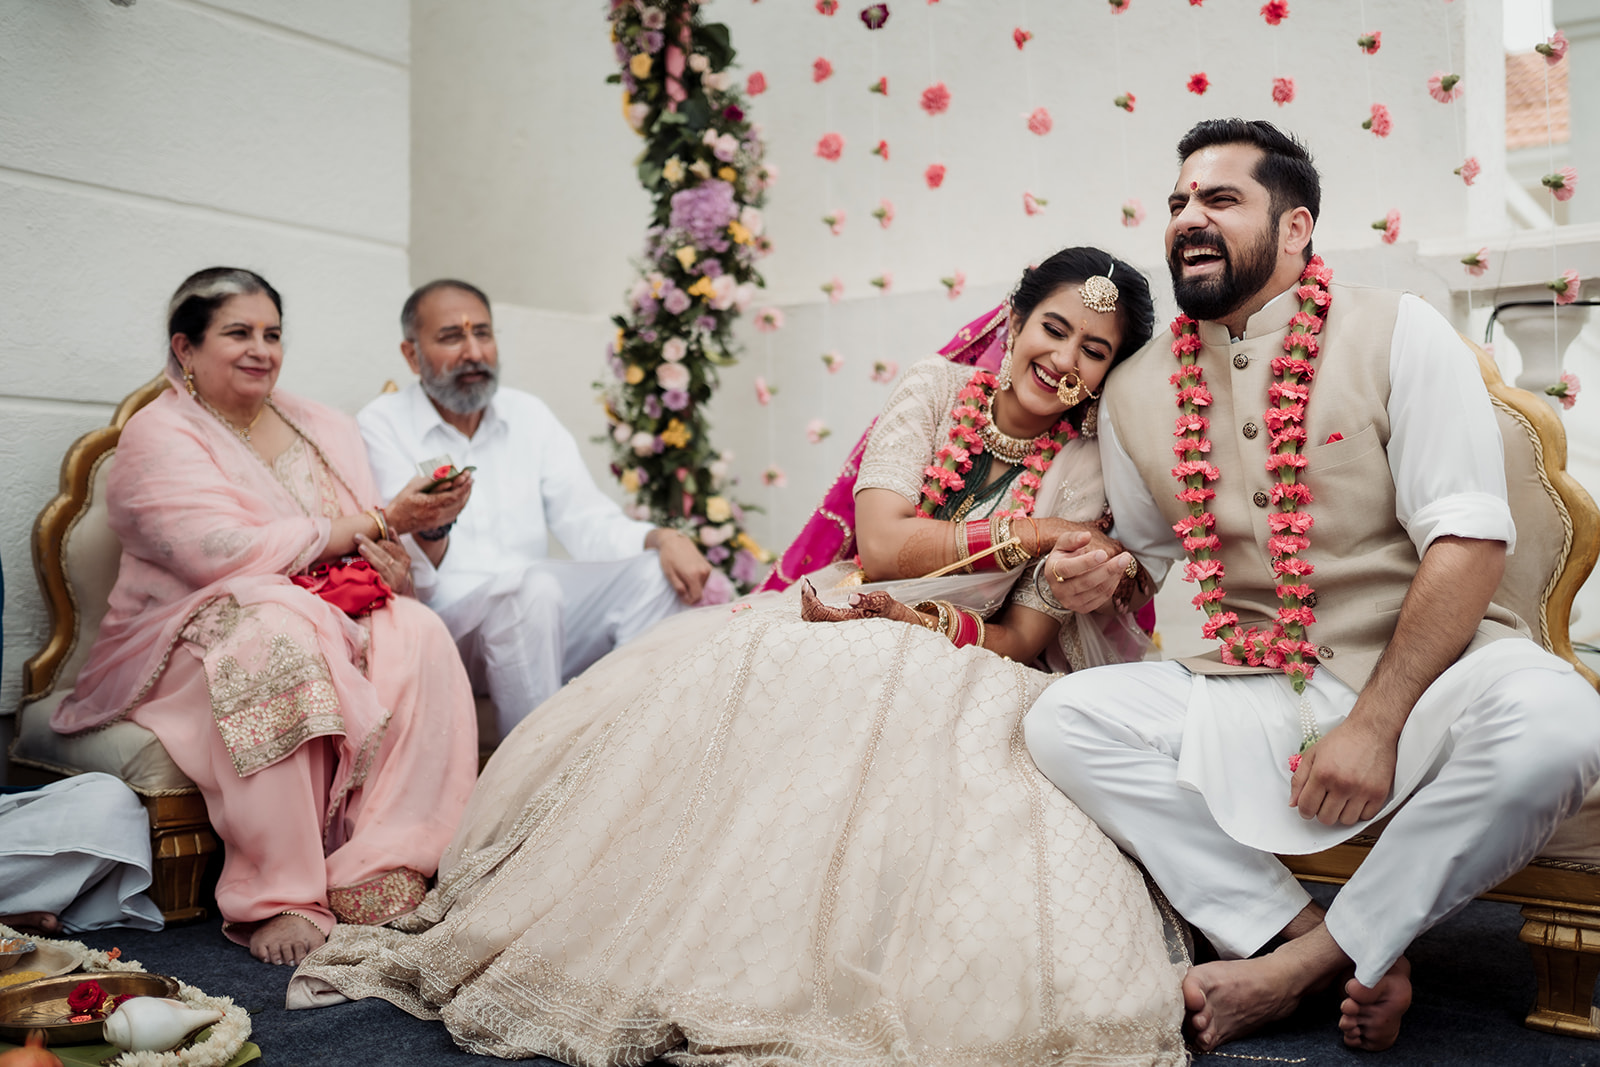 Wedding rites: A visual journey through the sacred and joyous ceremonies that unite two souls